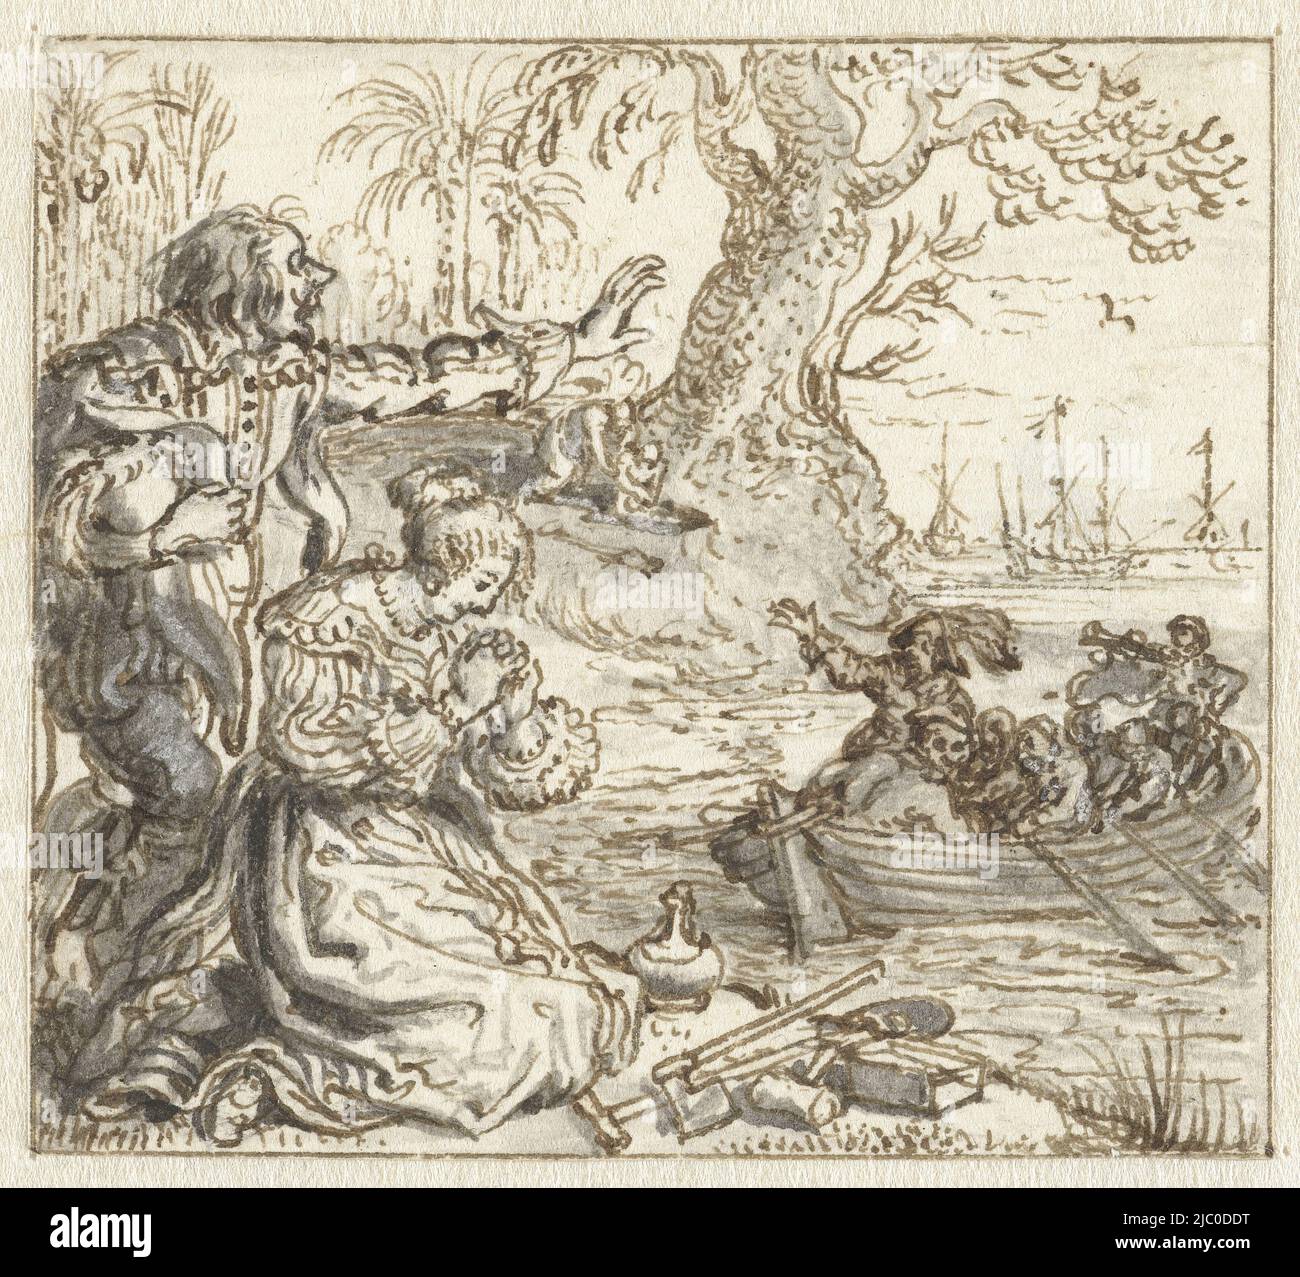 Design for a print, Rosette and Galant see the creatures leave the uninhabited island, draughtsman: Adriaen Pietersz. van de Venne, 1629 - 1634, paper, pen, brush, h 51 mm × w 56 mm Stock Photo